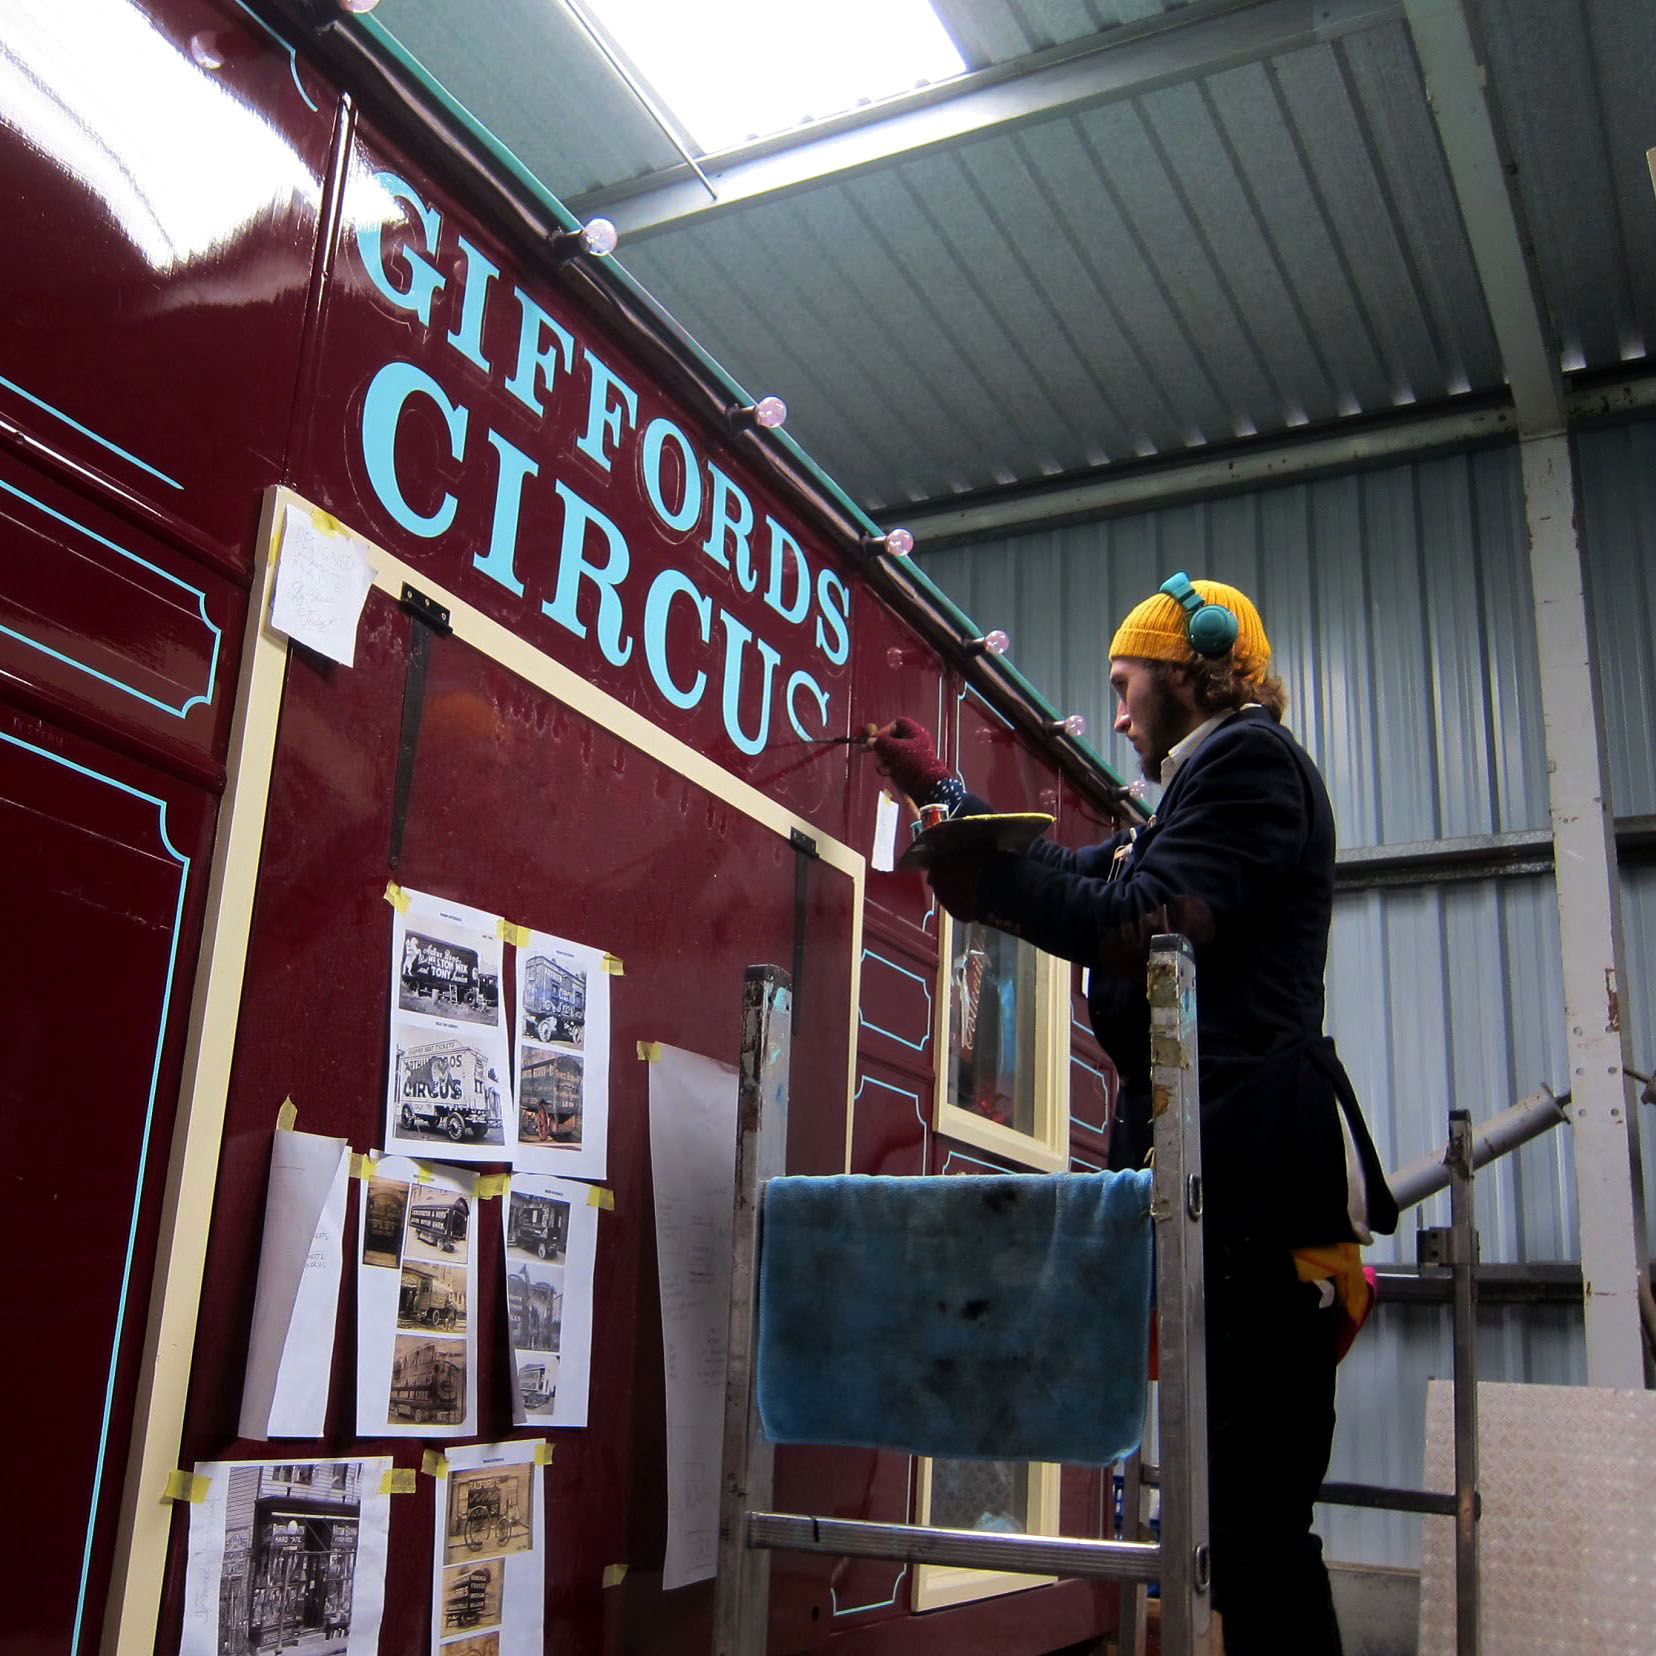 Gifford circus traditional lettering.jpg